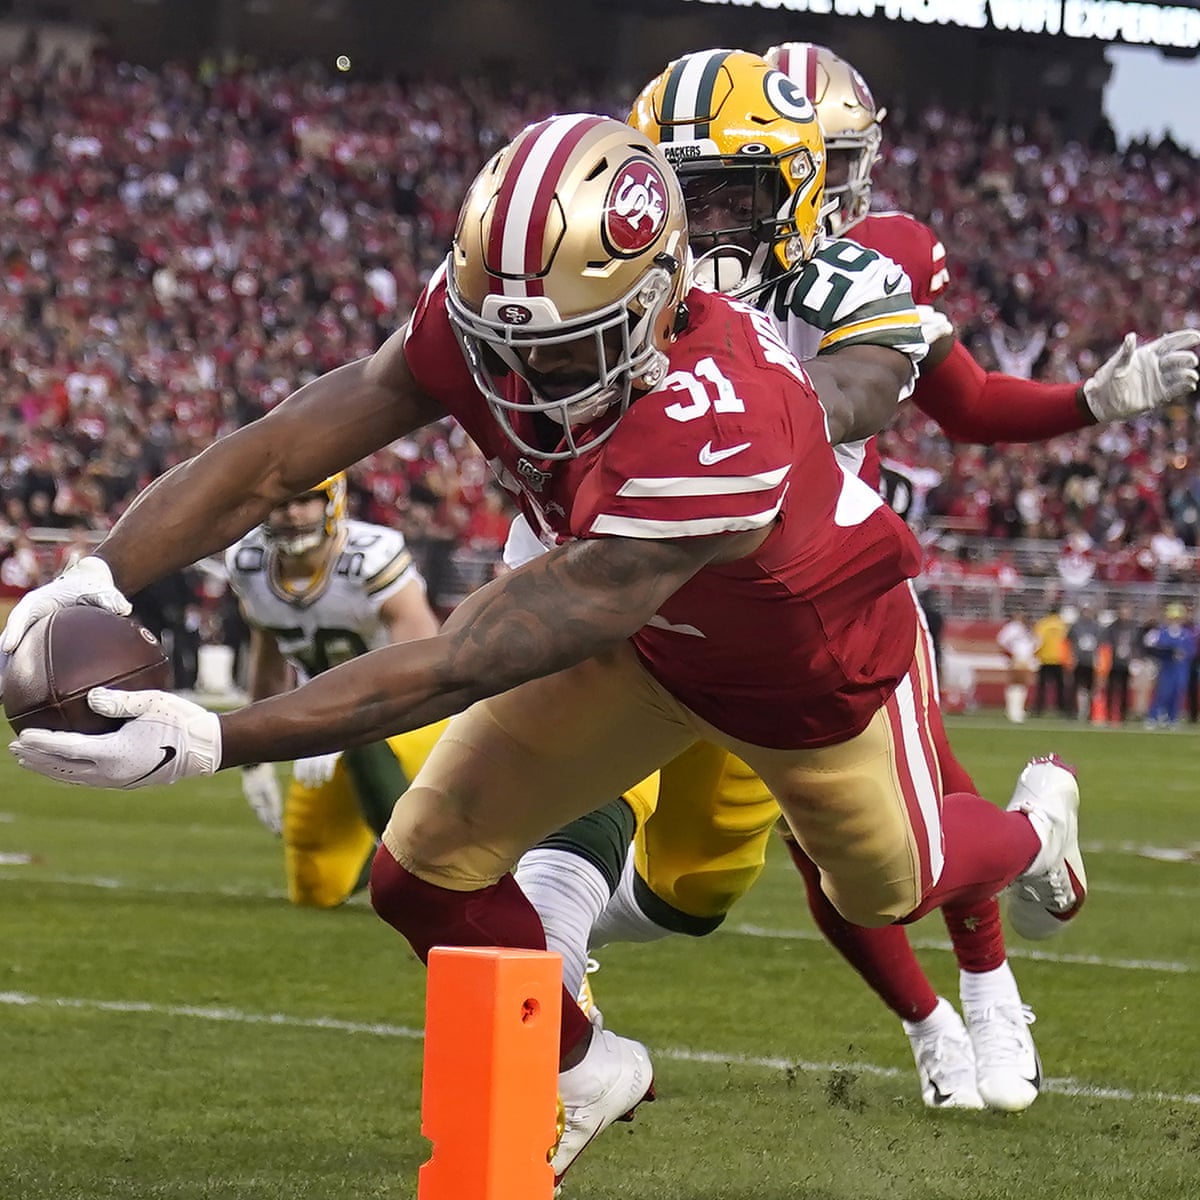 NFC championship game: Green Bay Packers 20-37 San Francisco 49ers